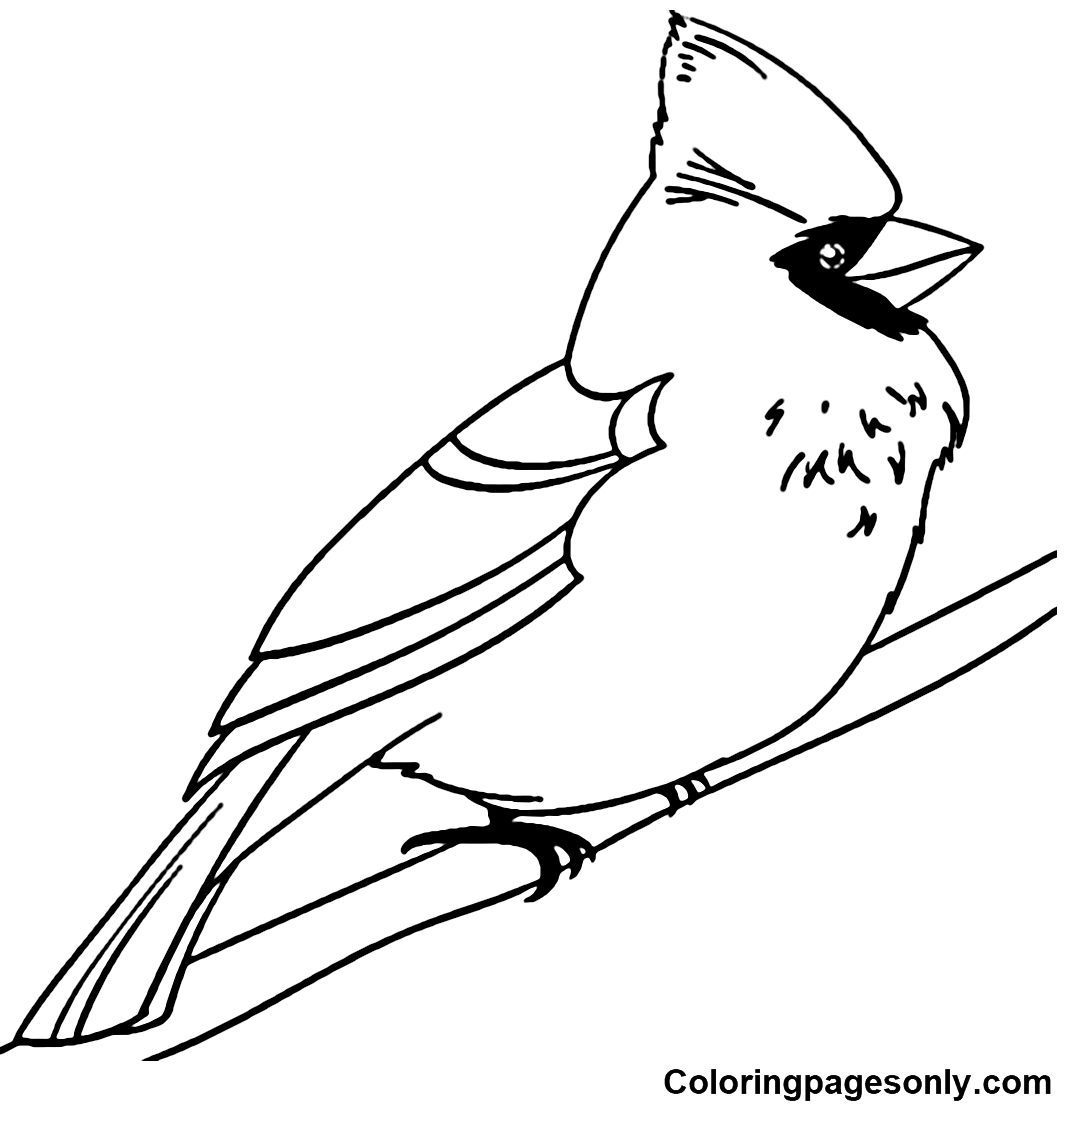 Cardinal Coloring Pages - Coloring Pages For Kids And Adults